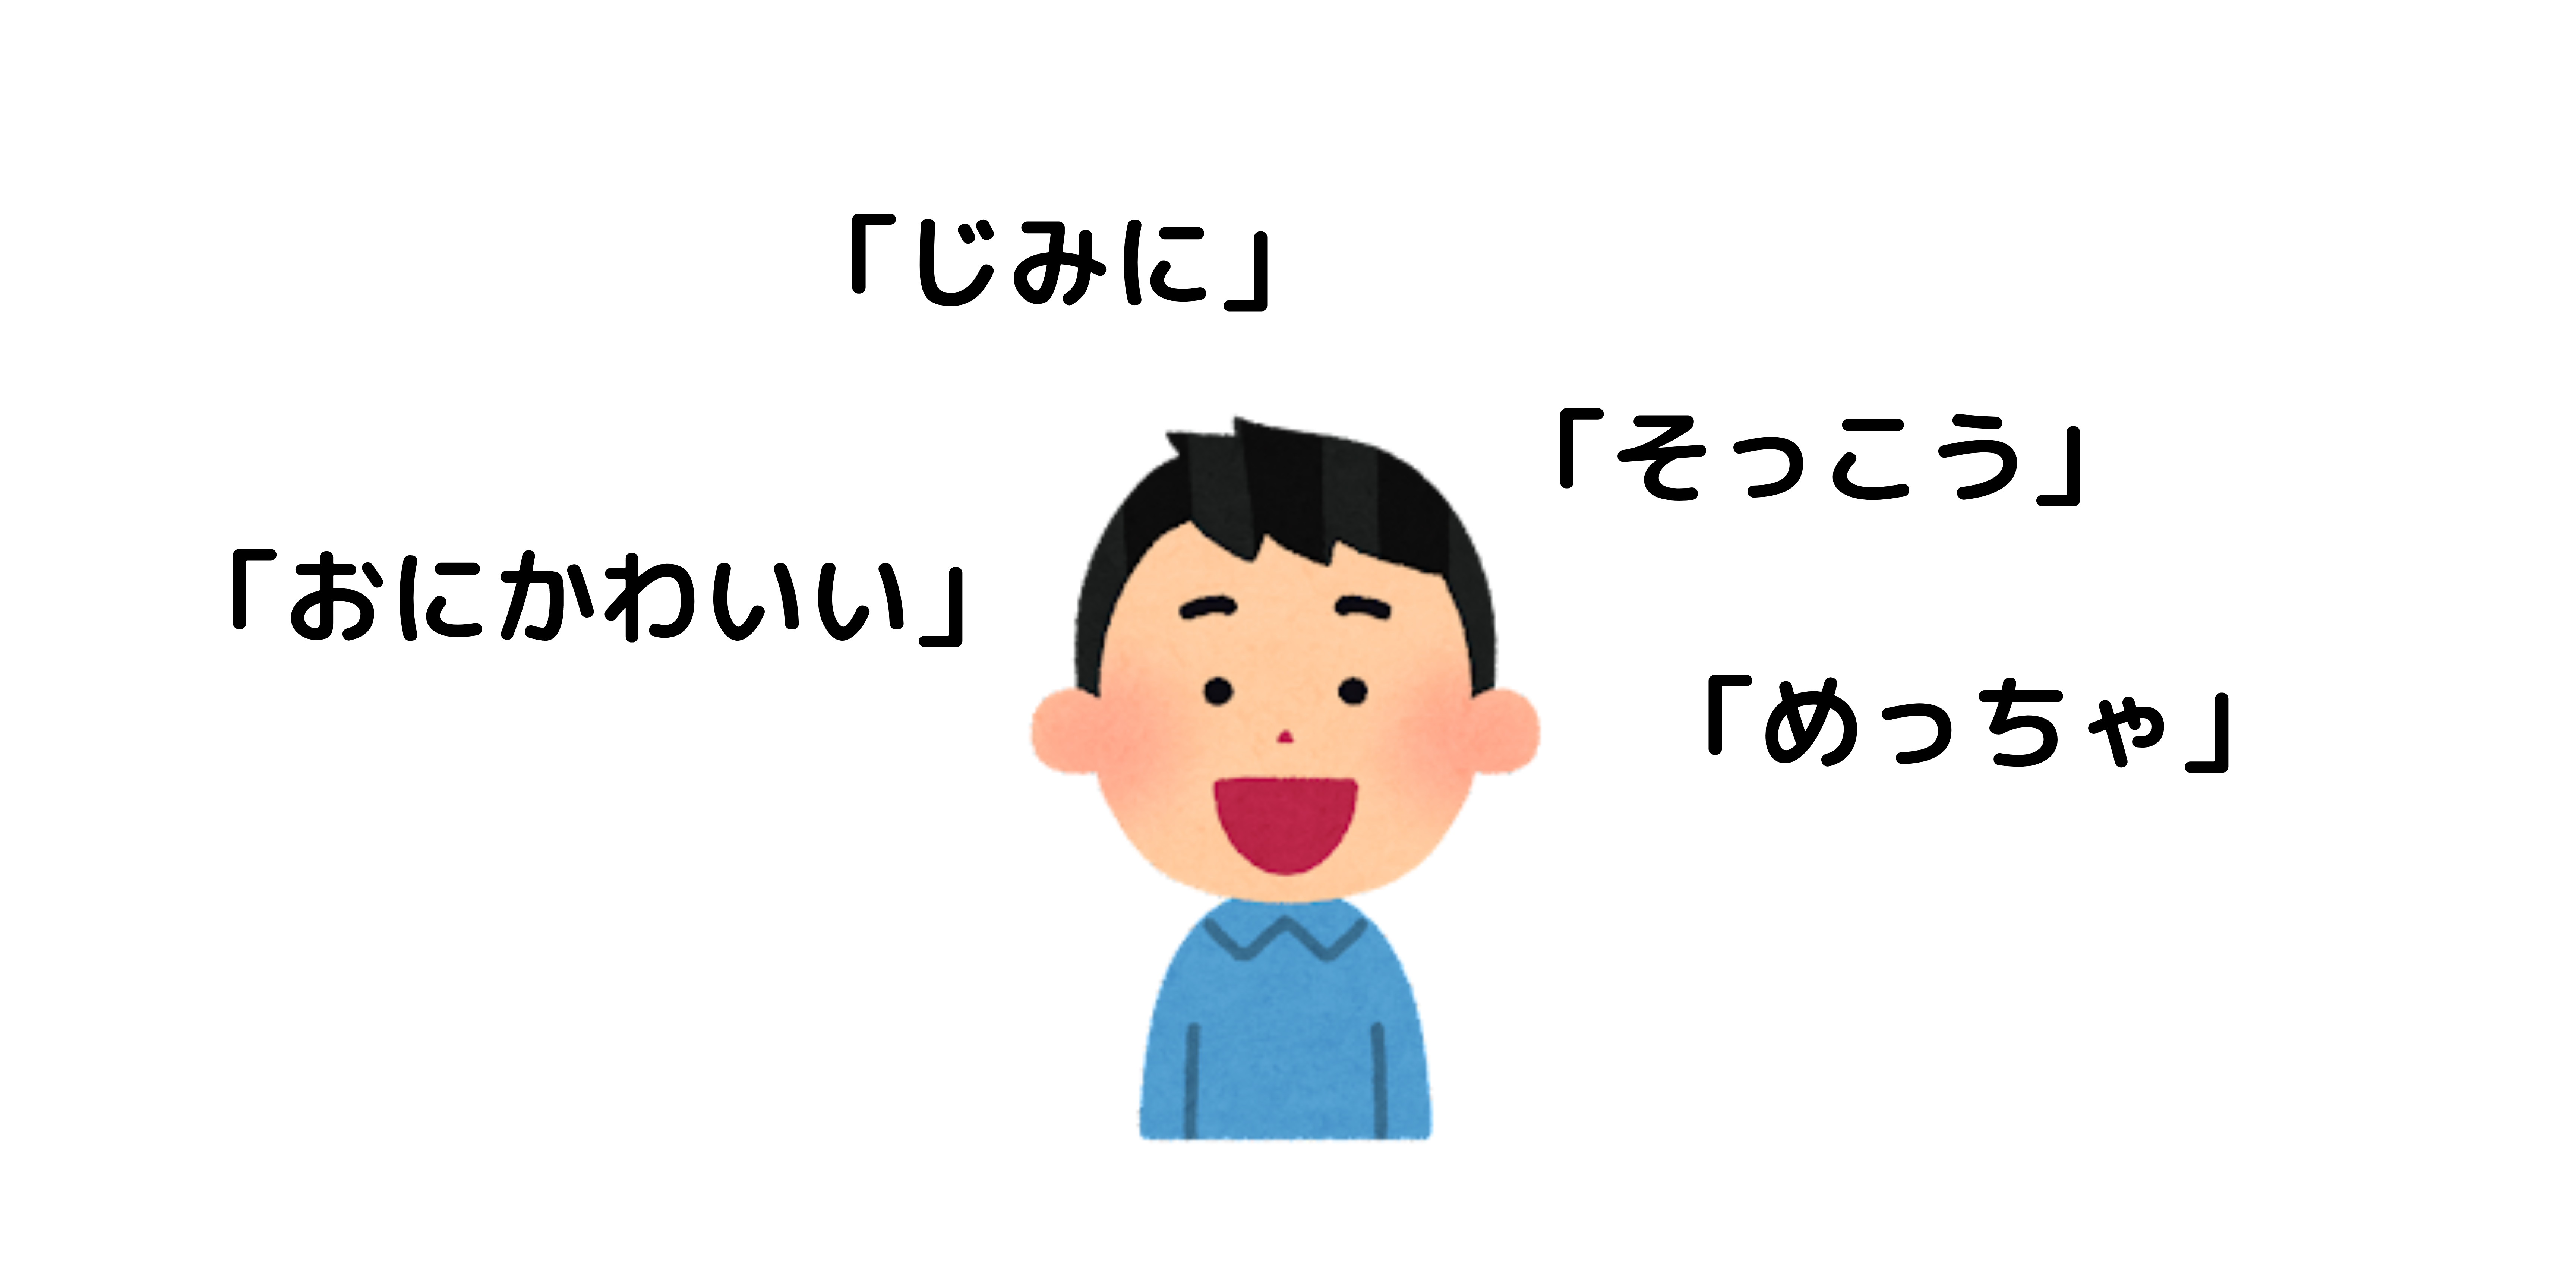 Many people don't mind others using new Japanese words 